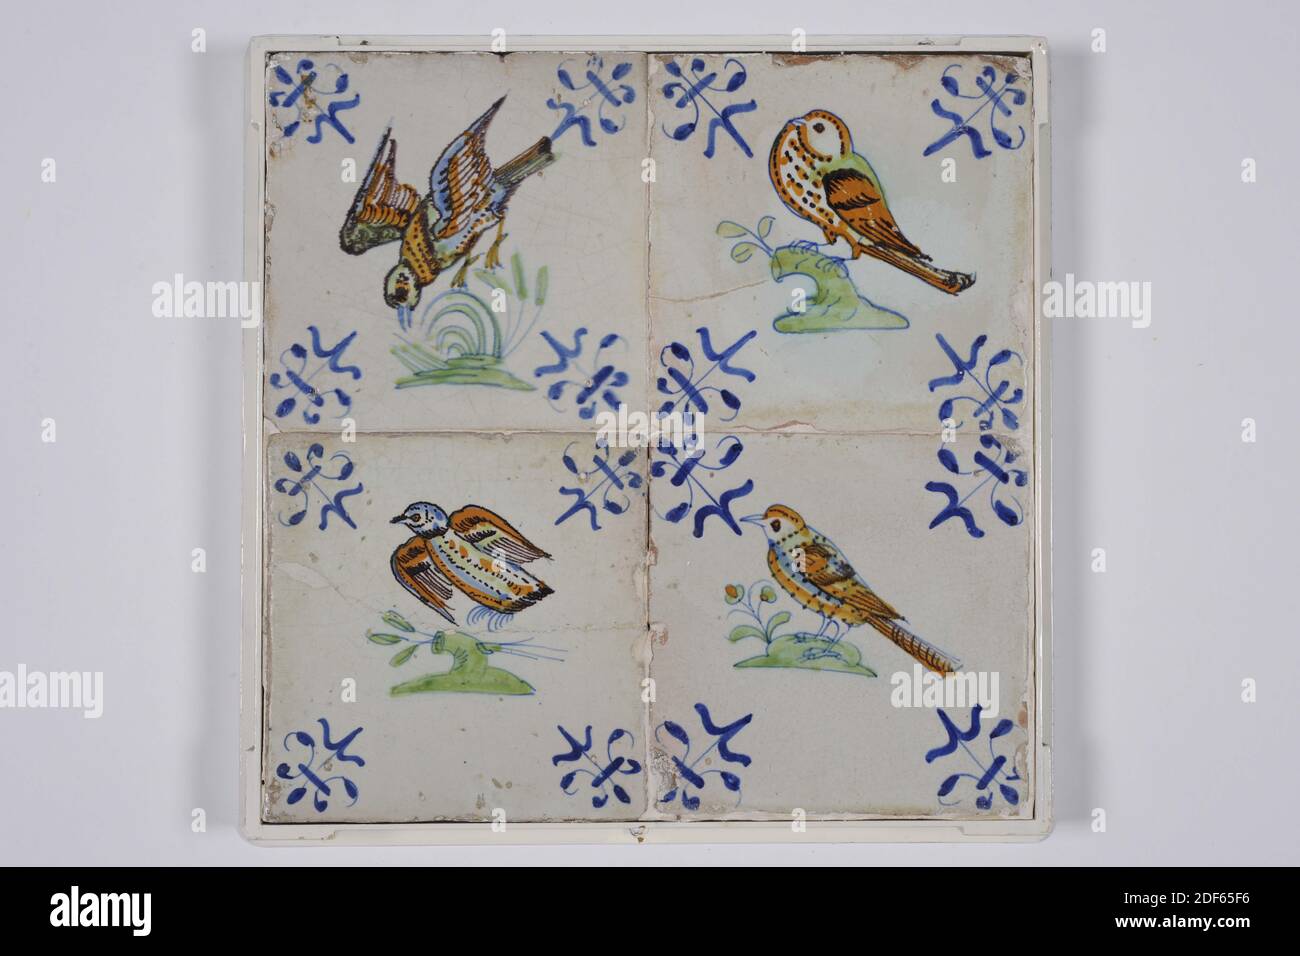 tile field, Anonymous, between 1620 - 1650, tin glaze, pottery, With frame: 16 x 54.7 x 3.6cm (160 x 547 x 36mm), bird, Tile field of four tiles (one by four) of earthenware covered with tin glaze. Multicolor painted in blue, green and orange. On each tile is a bird centered to the left, always on a light green ground with an orange spot and a light green branch. The birds from left to right: 1: profile profiled to the left in blue, orange and green, 2: profile profiled to the left with a long neck, head turned to the right, 3: profile profiled to the left in blue, orange and green, with short Stock Photo